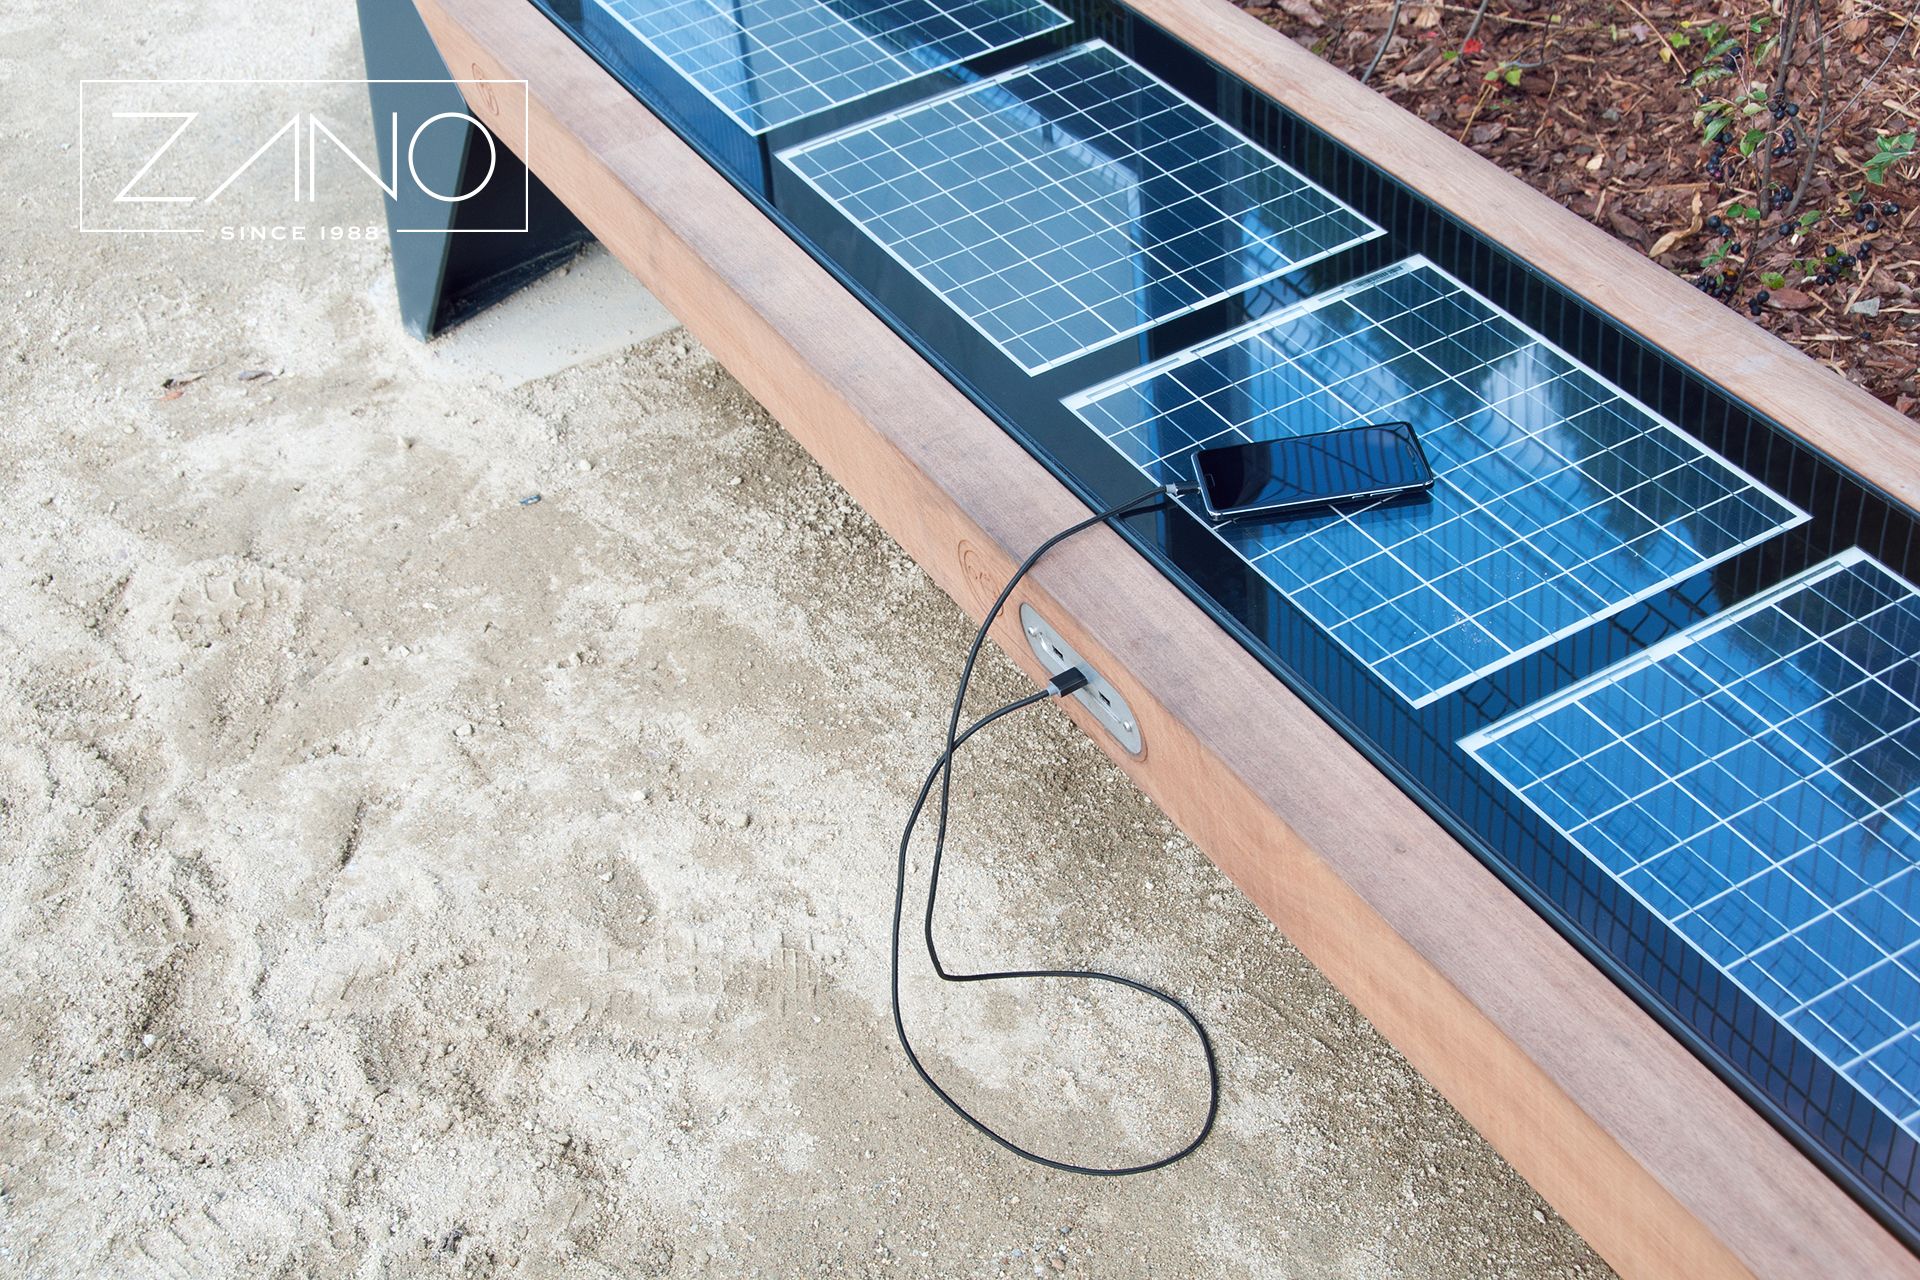 Photon bench | Solar bench with photovoltaic panels